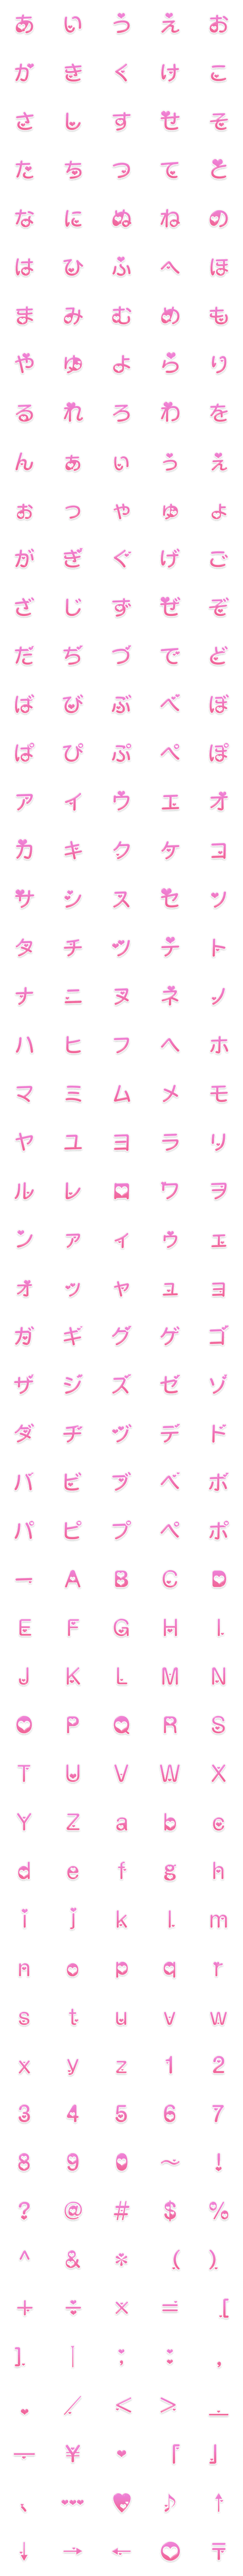 [LINE絵文字]＊ぷっくり♪ハートの絵文字＊の画像一覧